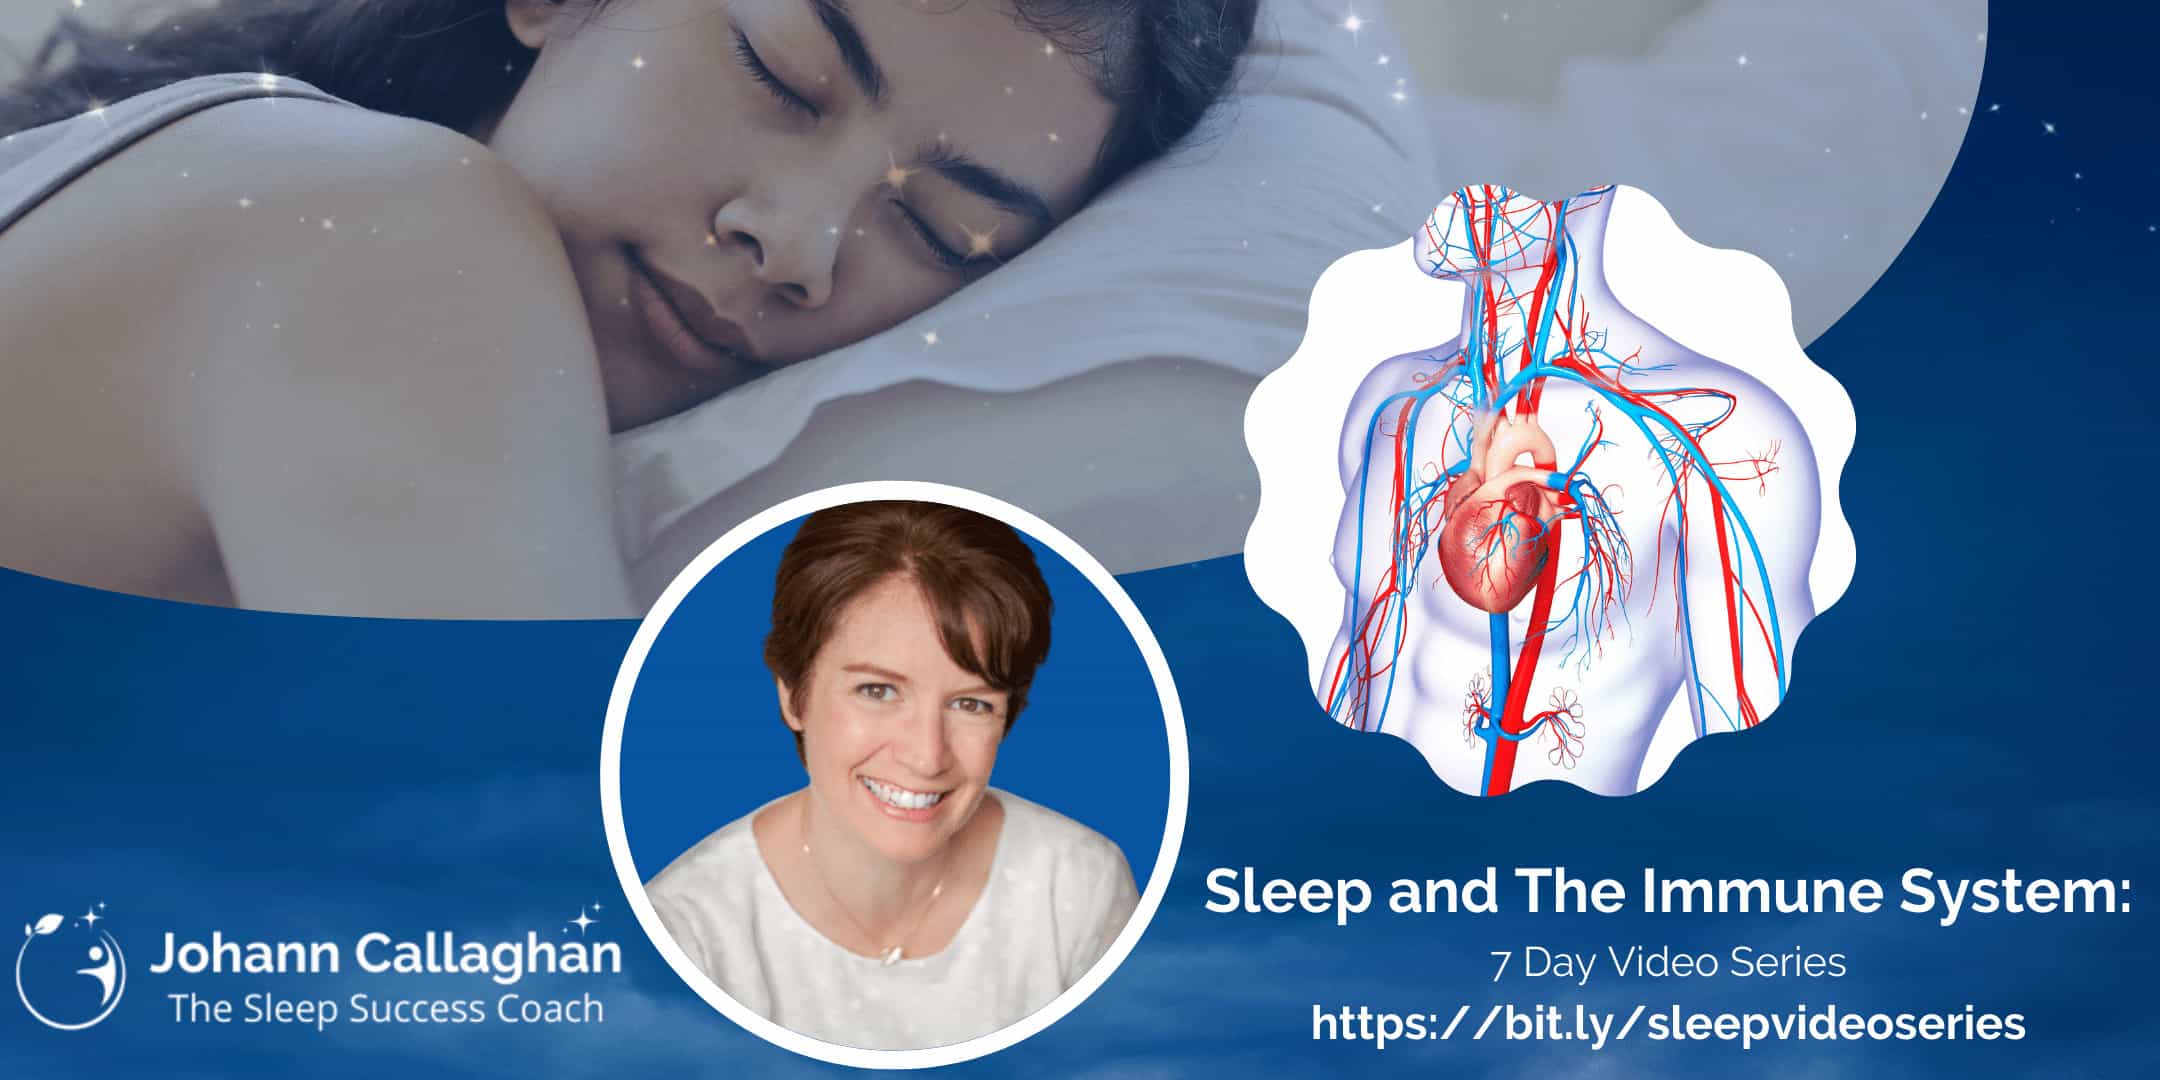 Sleep and The Immune System